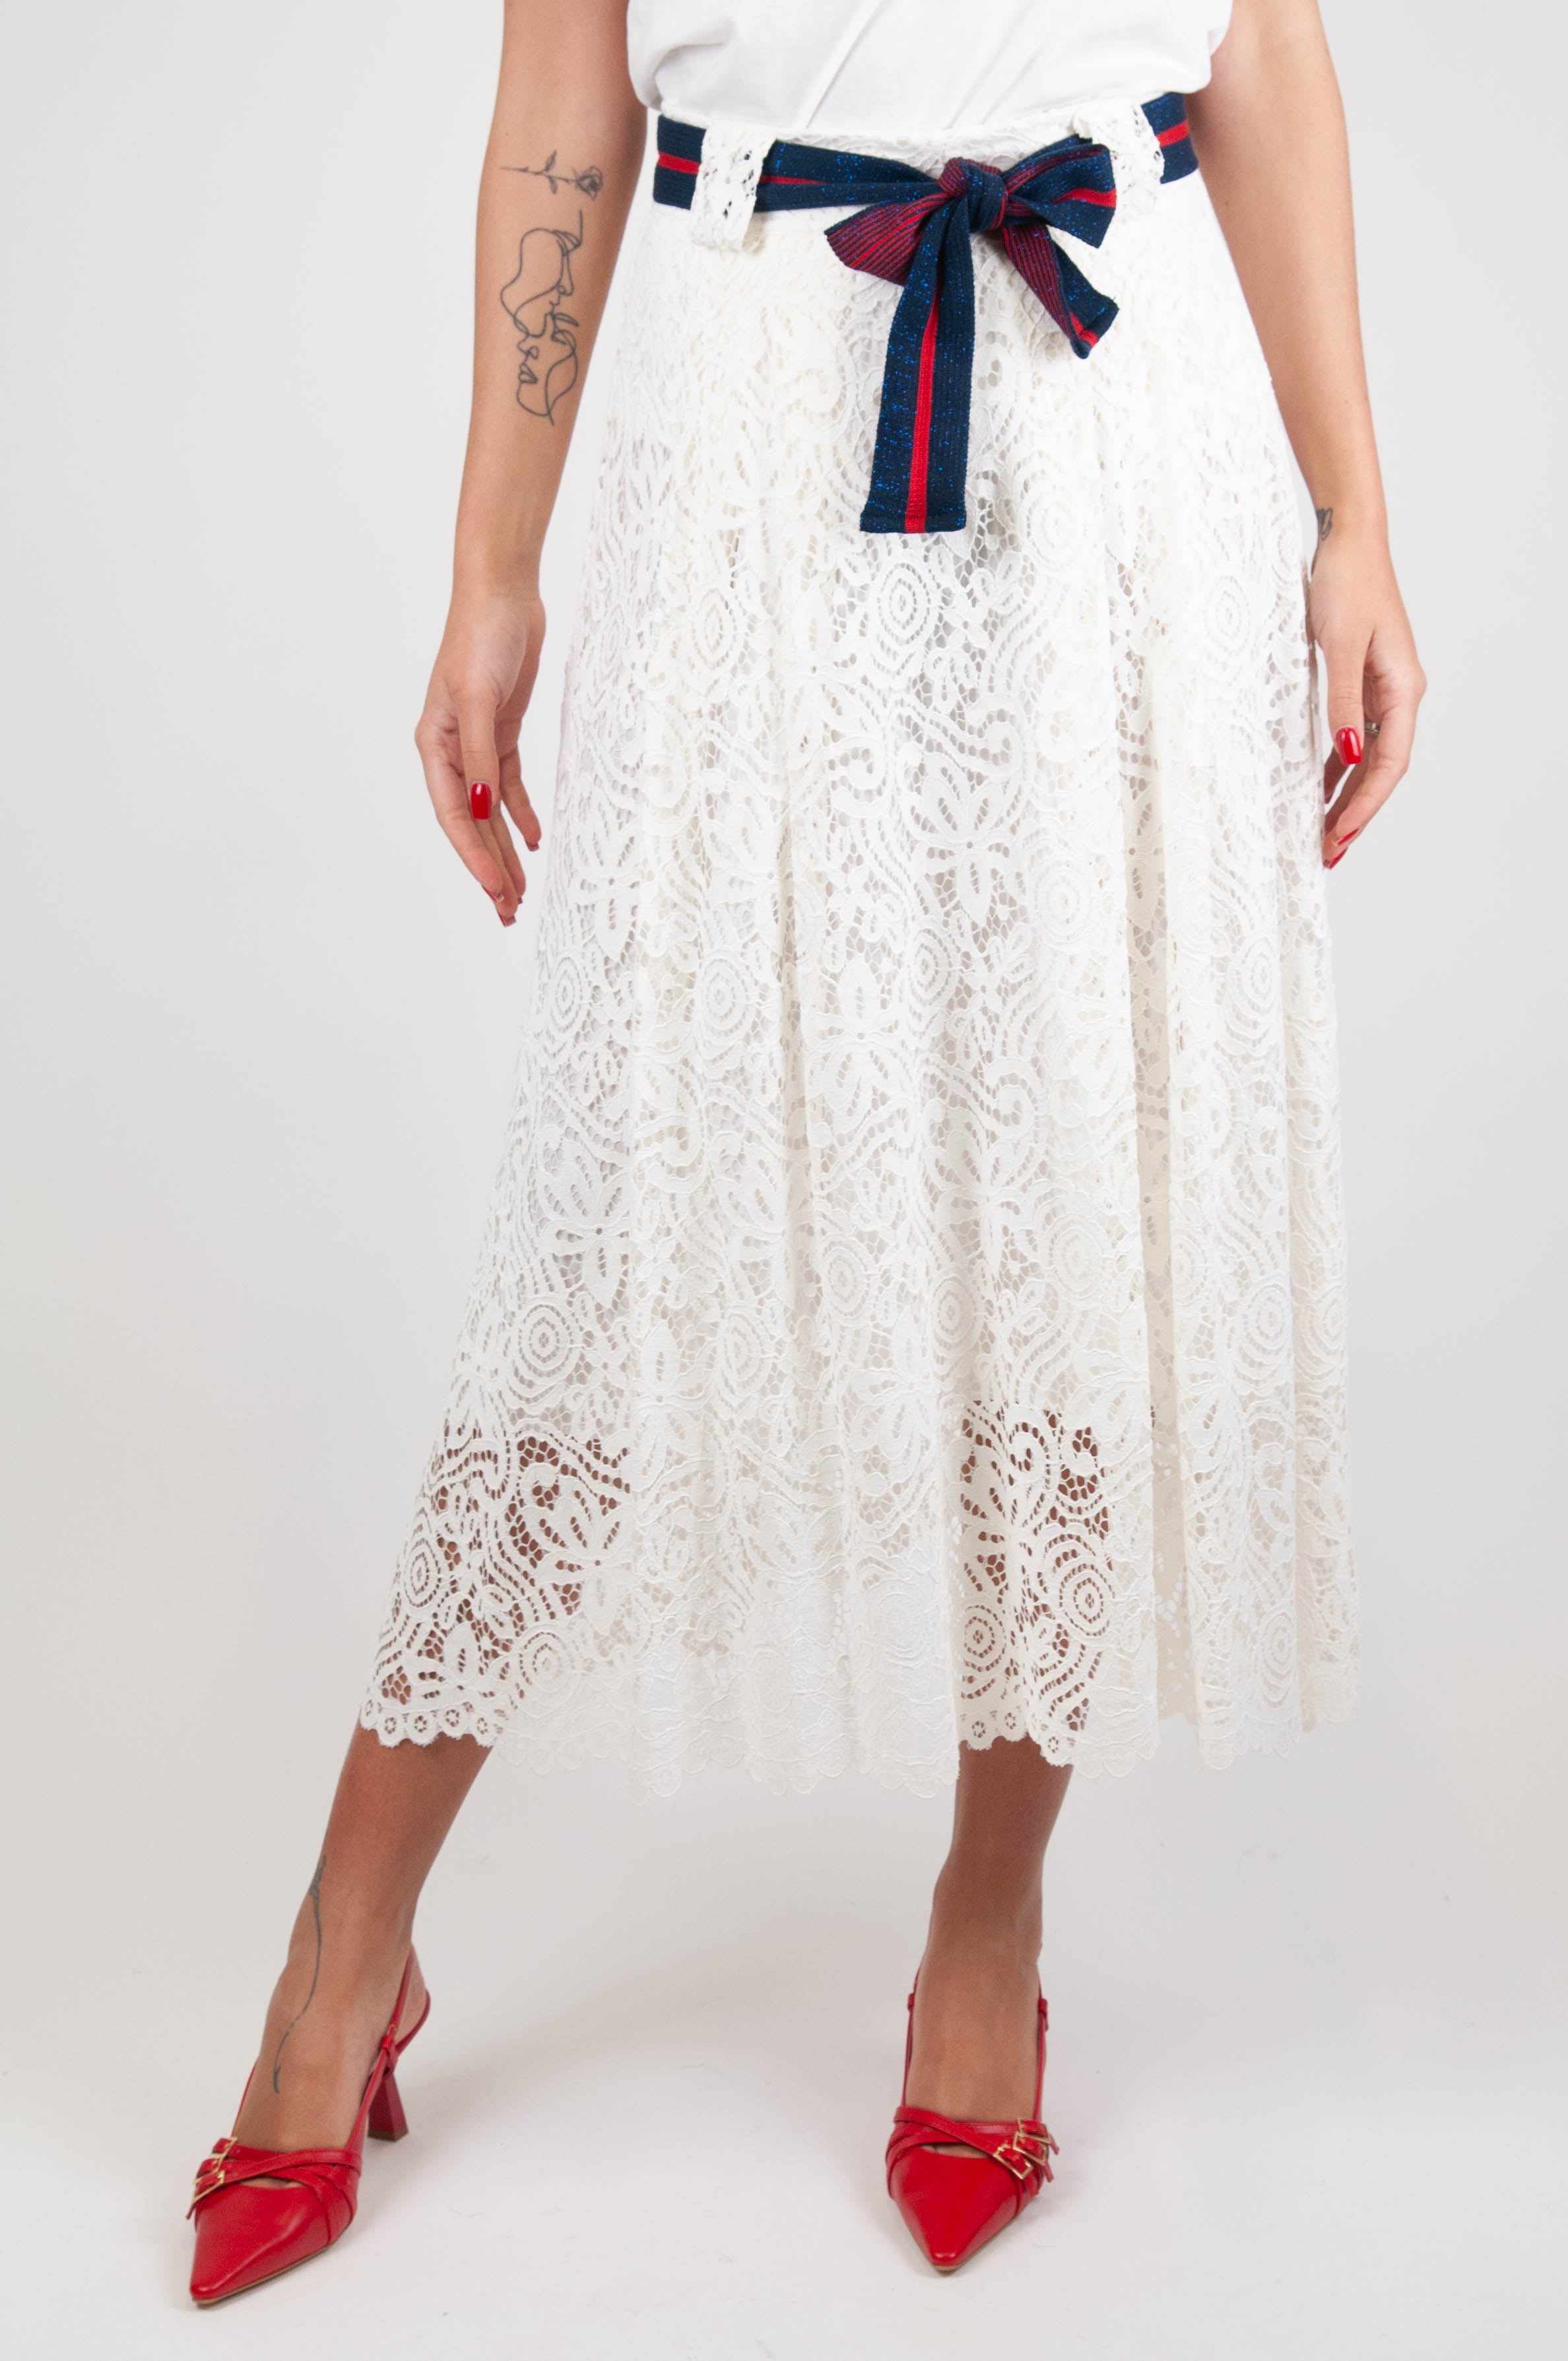 Tension in - Lace skirt with belt